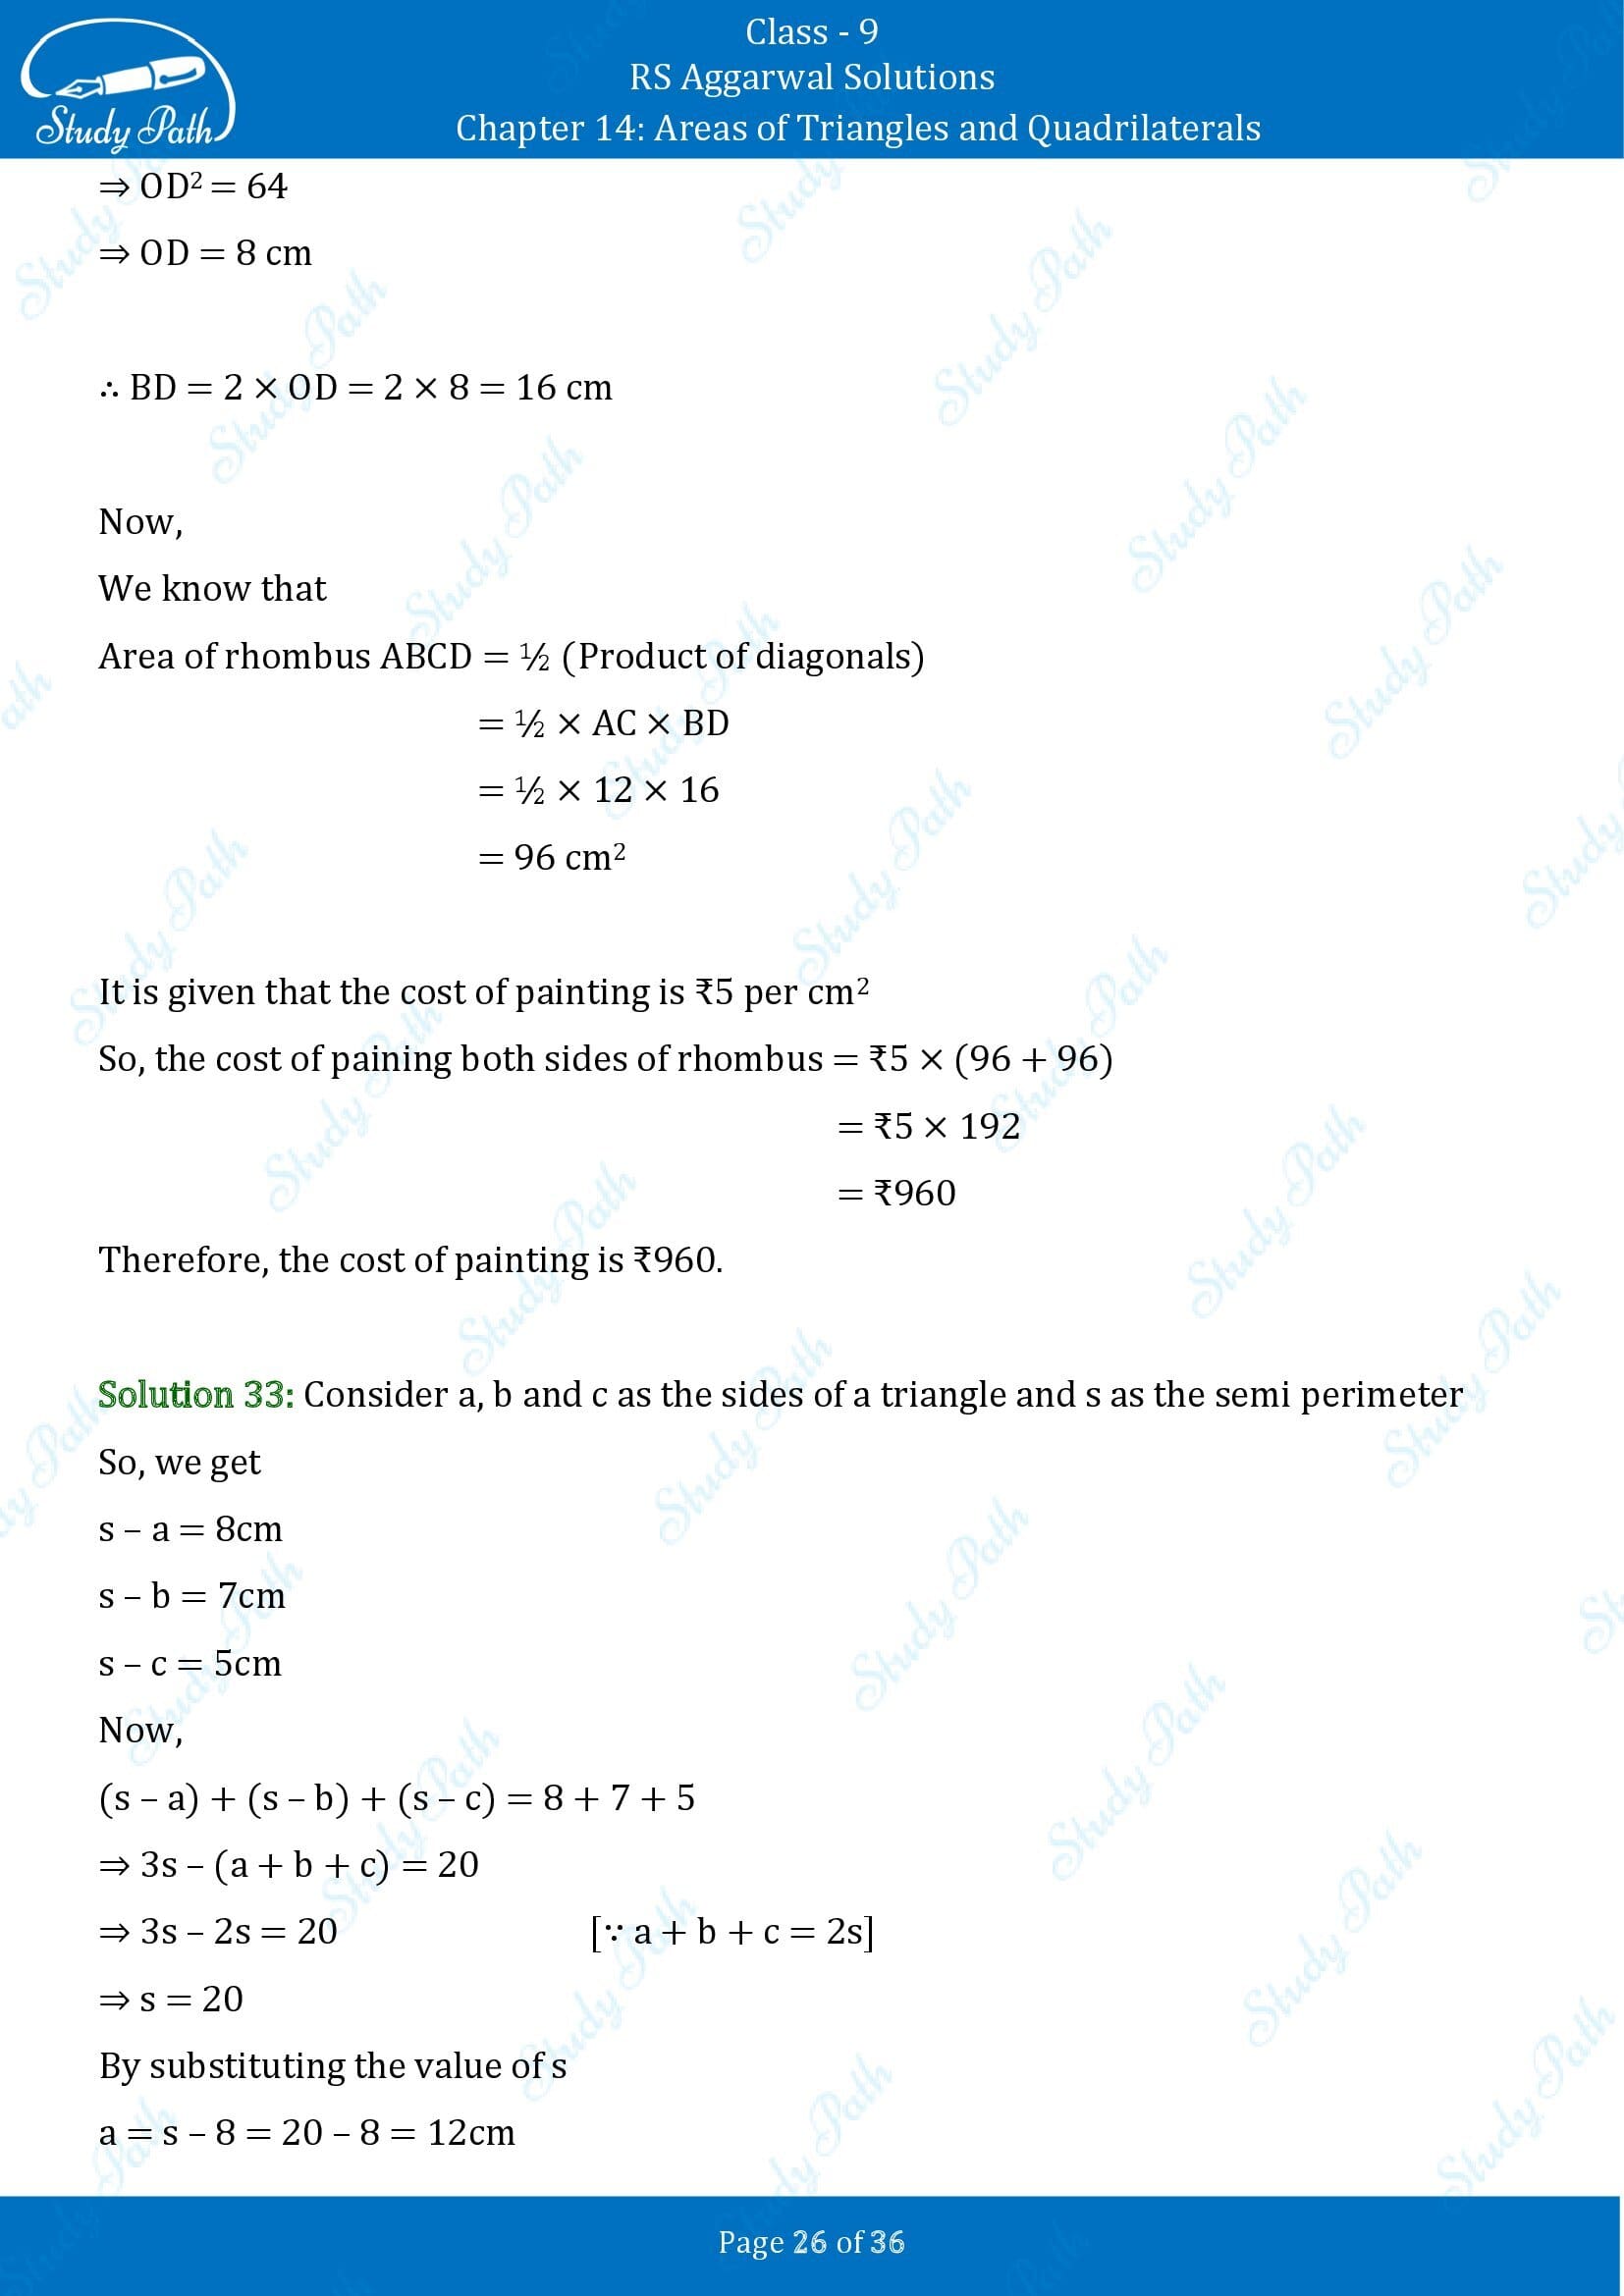 RS Aggarwal Solutions Class 9 Chapter 14 Areas of Triangles and Quadrilaterals Exercise 14 00026